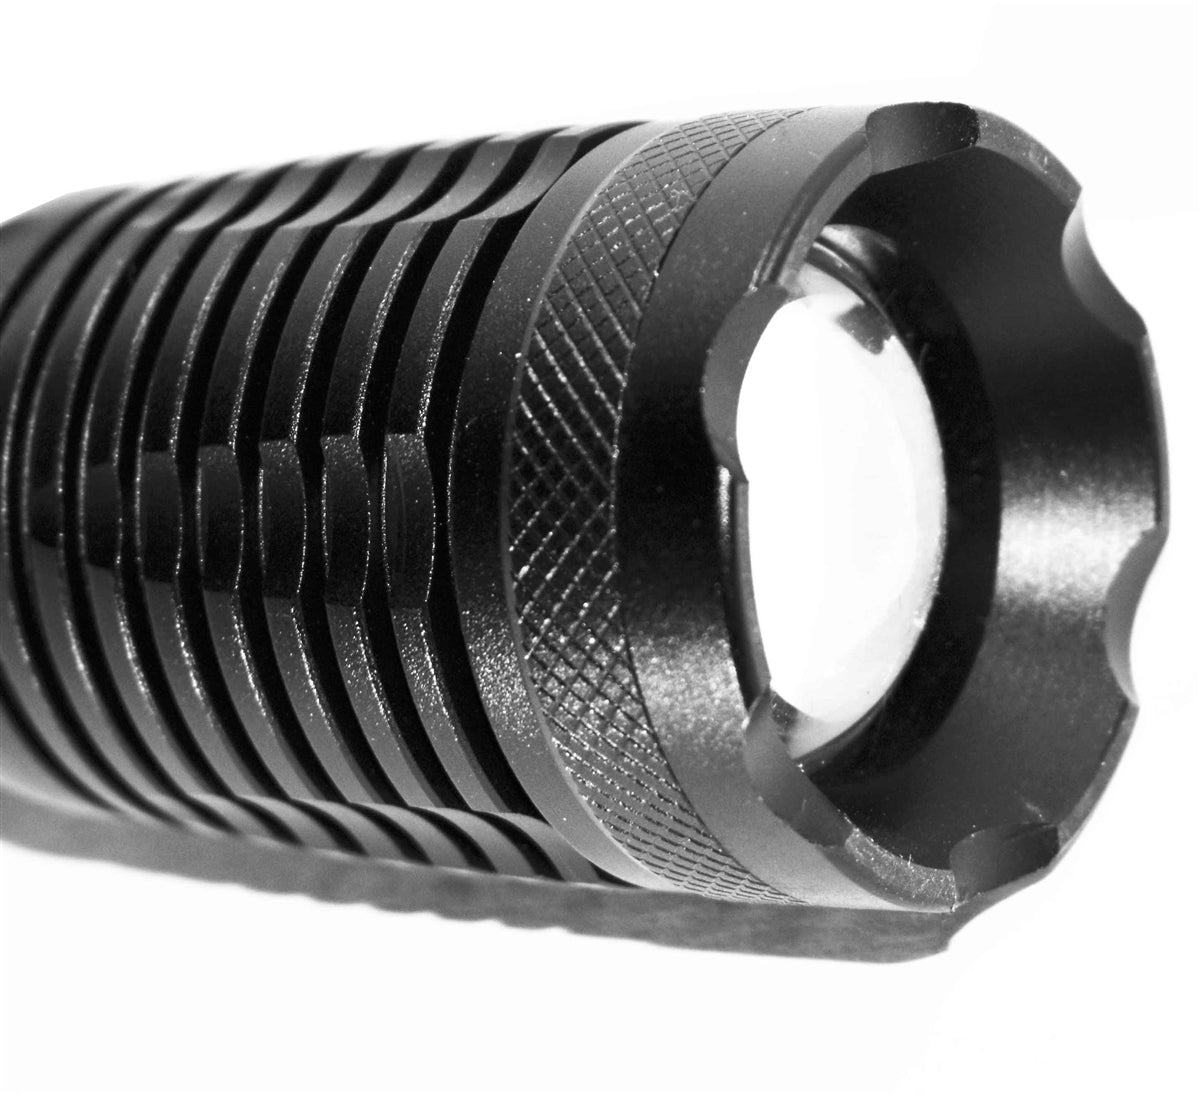 Tactical 1500 Lumen Flashlight With Mount Compatible With Mossberg 500 12 gauge Pump. - TRINITY SUPPLY INC